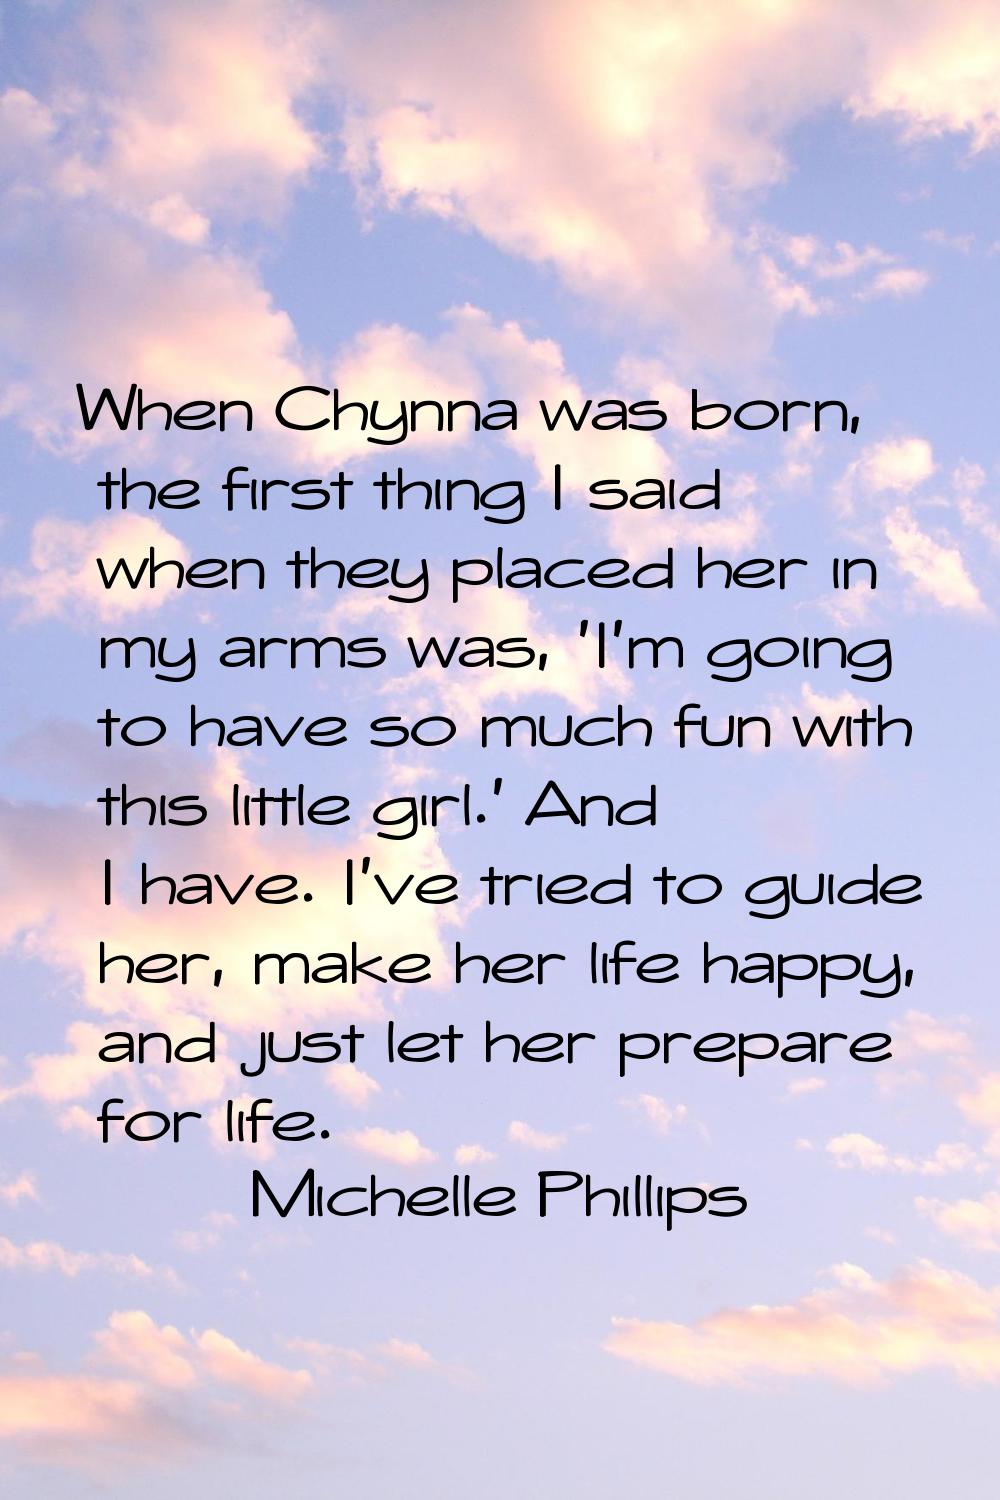 When Chynna was born, the first thing I said when they placed her in my arms was, 'I'm going to hav